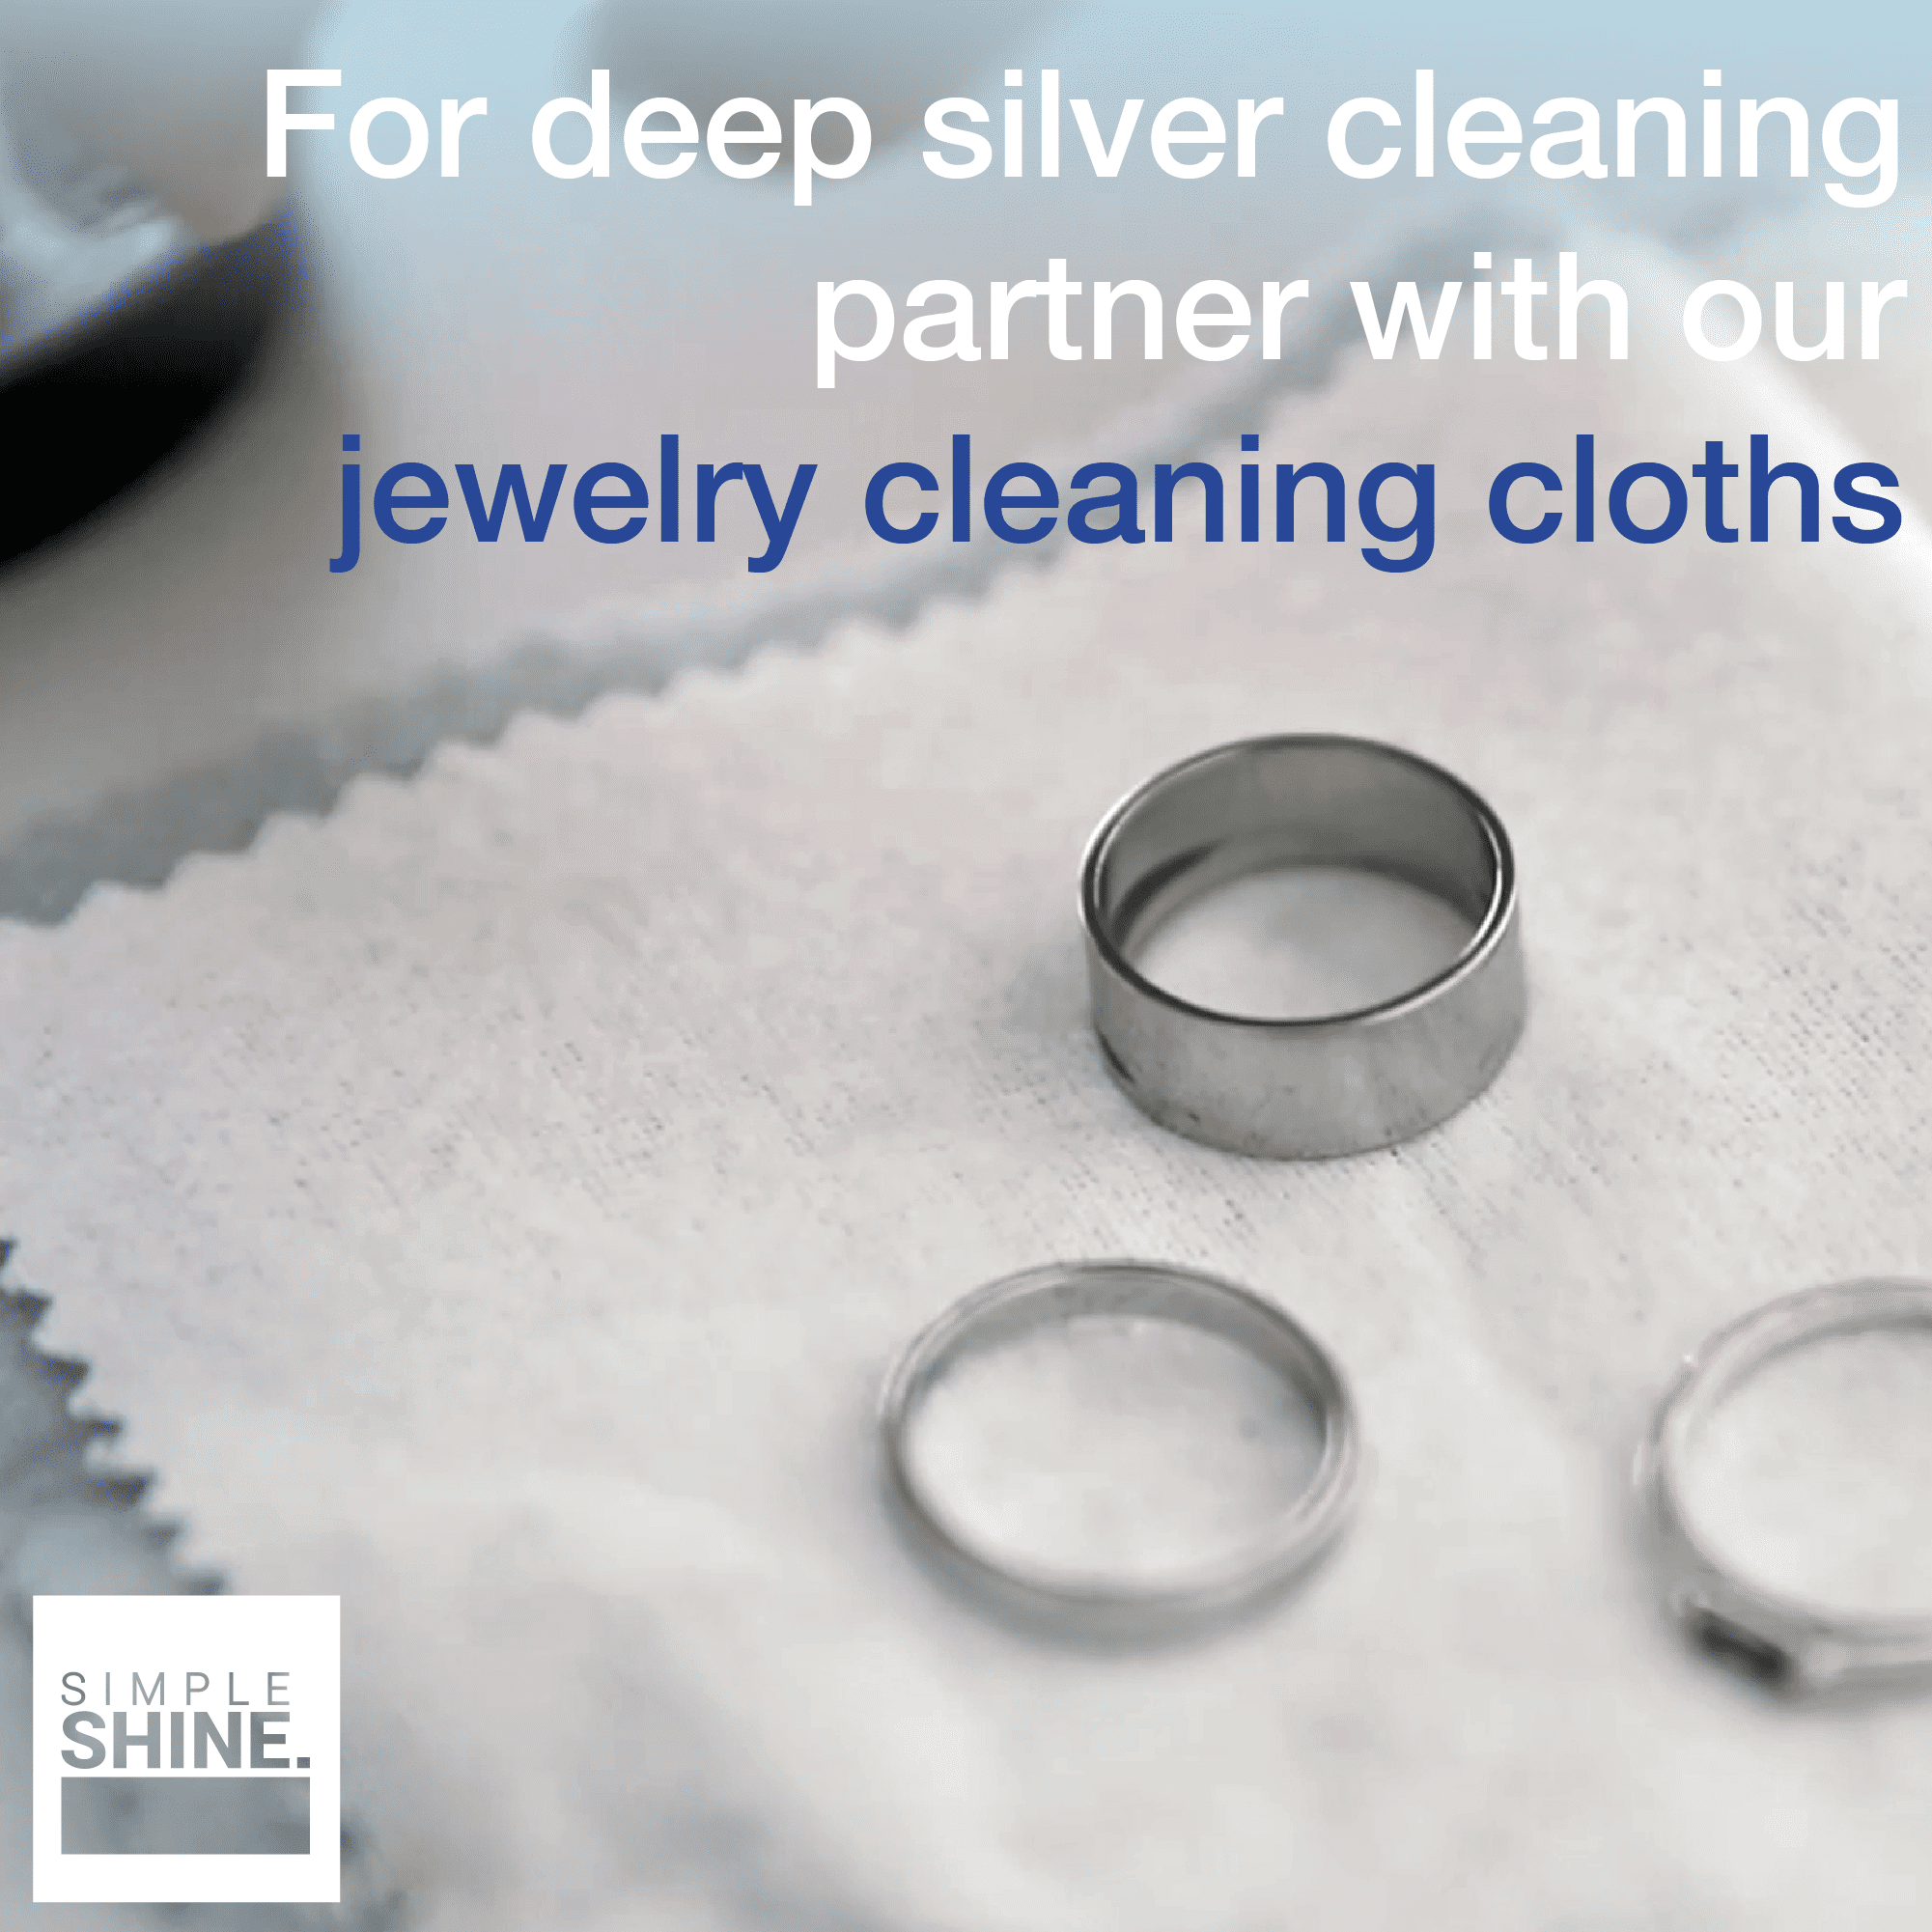 How to clean silver jewelry at home with 7 simple steps